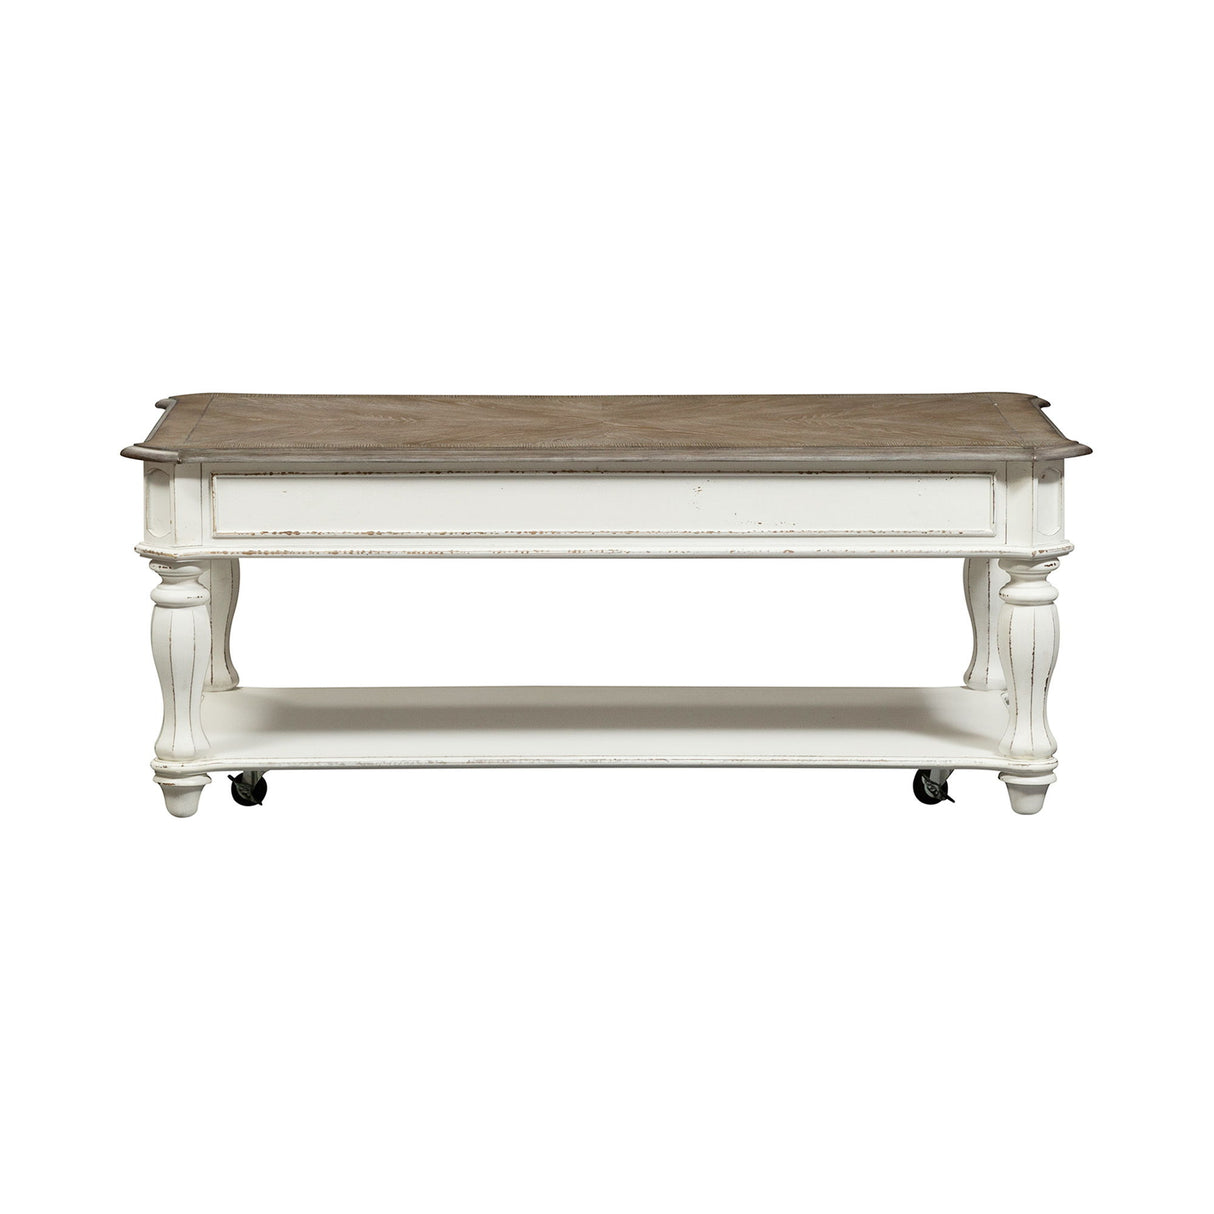 Magnolia Manor - Lift Top Cocktail Table - White